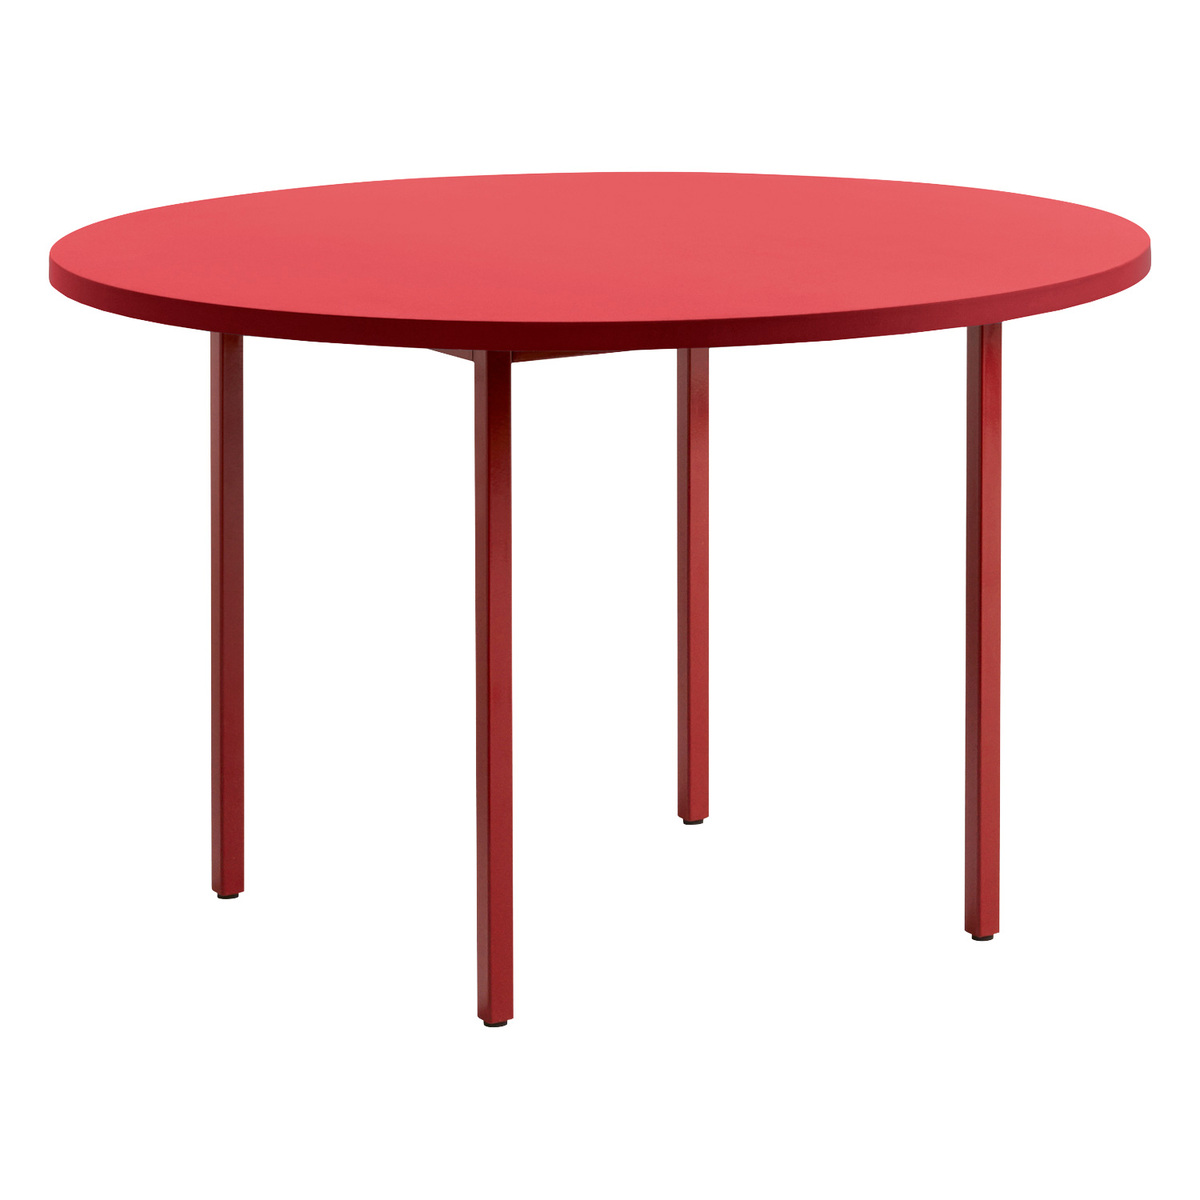 Two-Colour table, 120 cm, maroon red - red | Finnish Design Shop